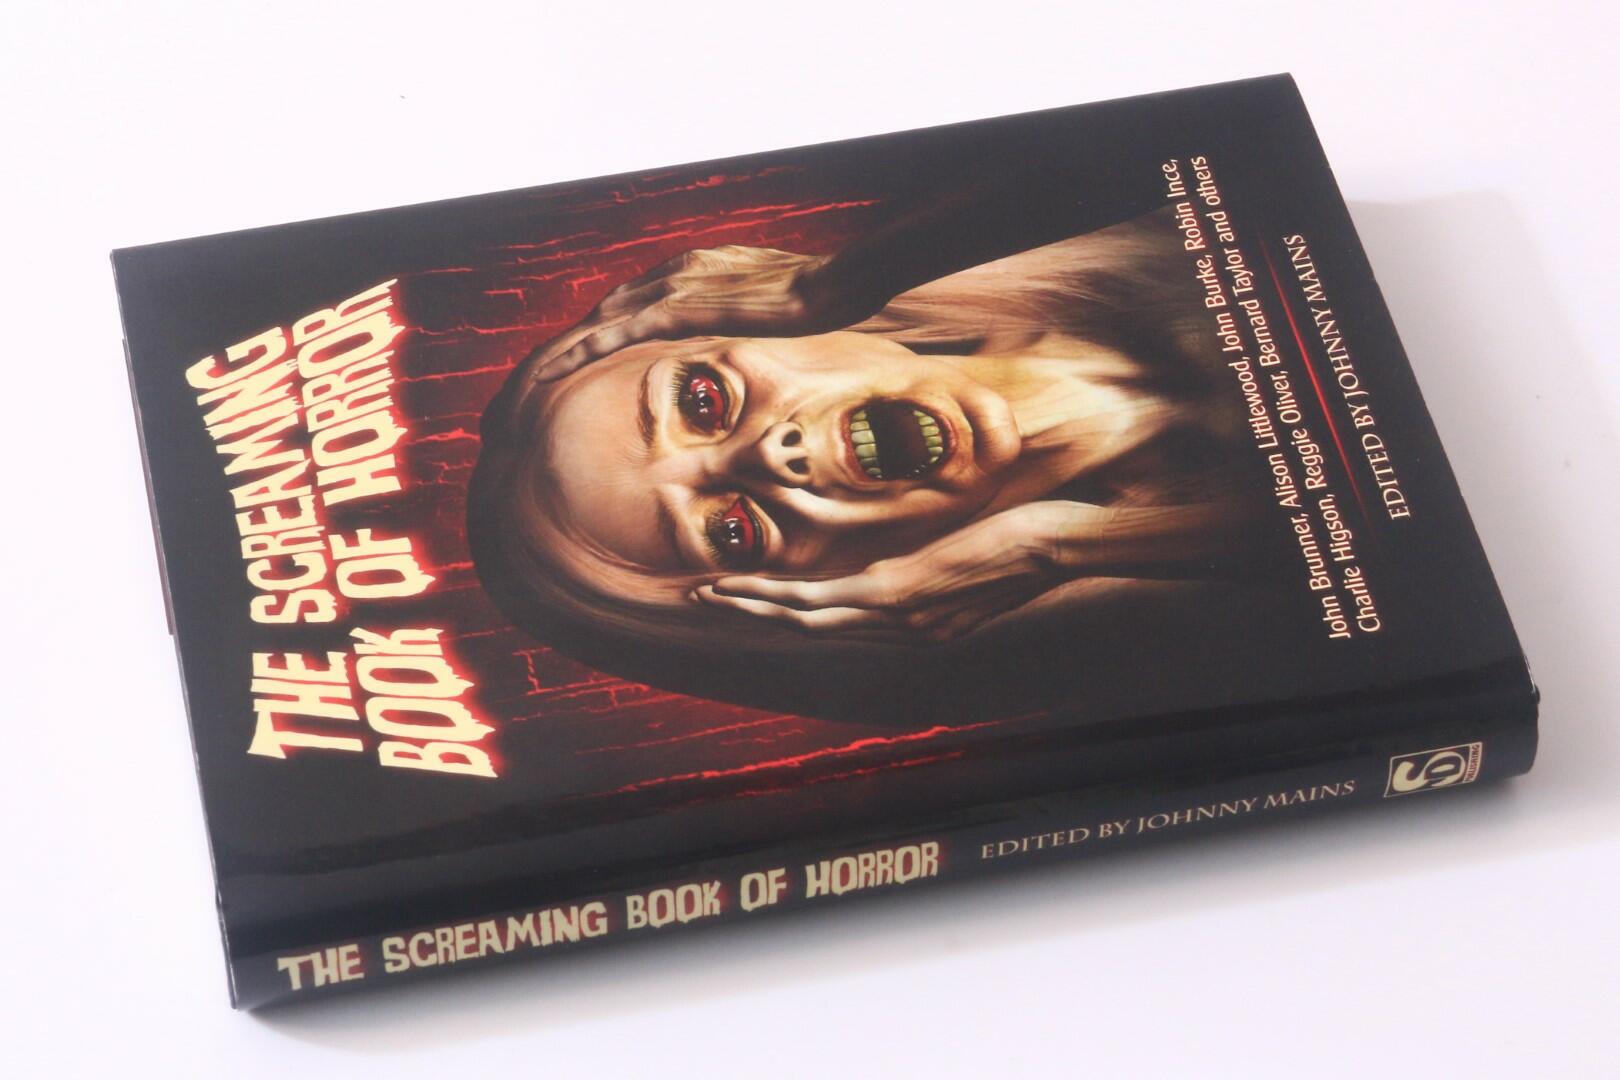 Johnnu Mains - The Screaming Book of Horror - Screaming Dreams, 2012, First Edition.